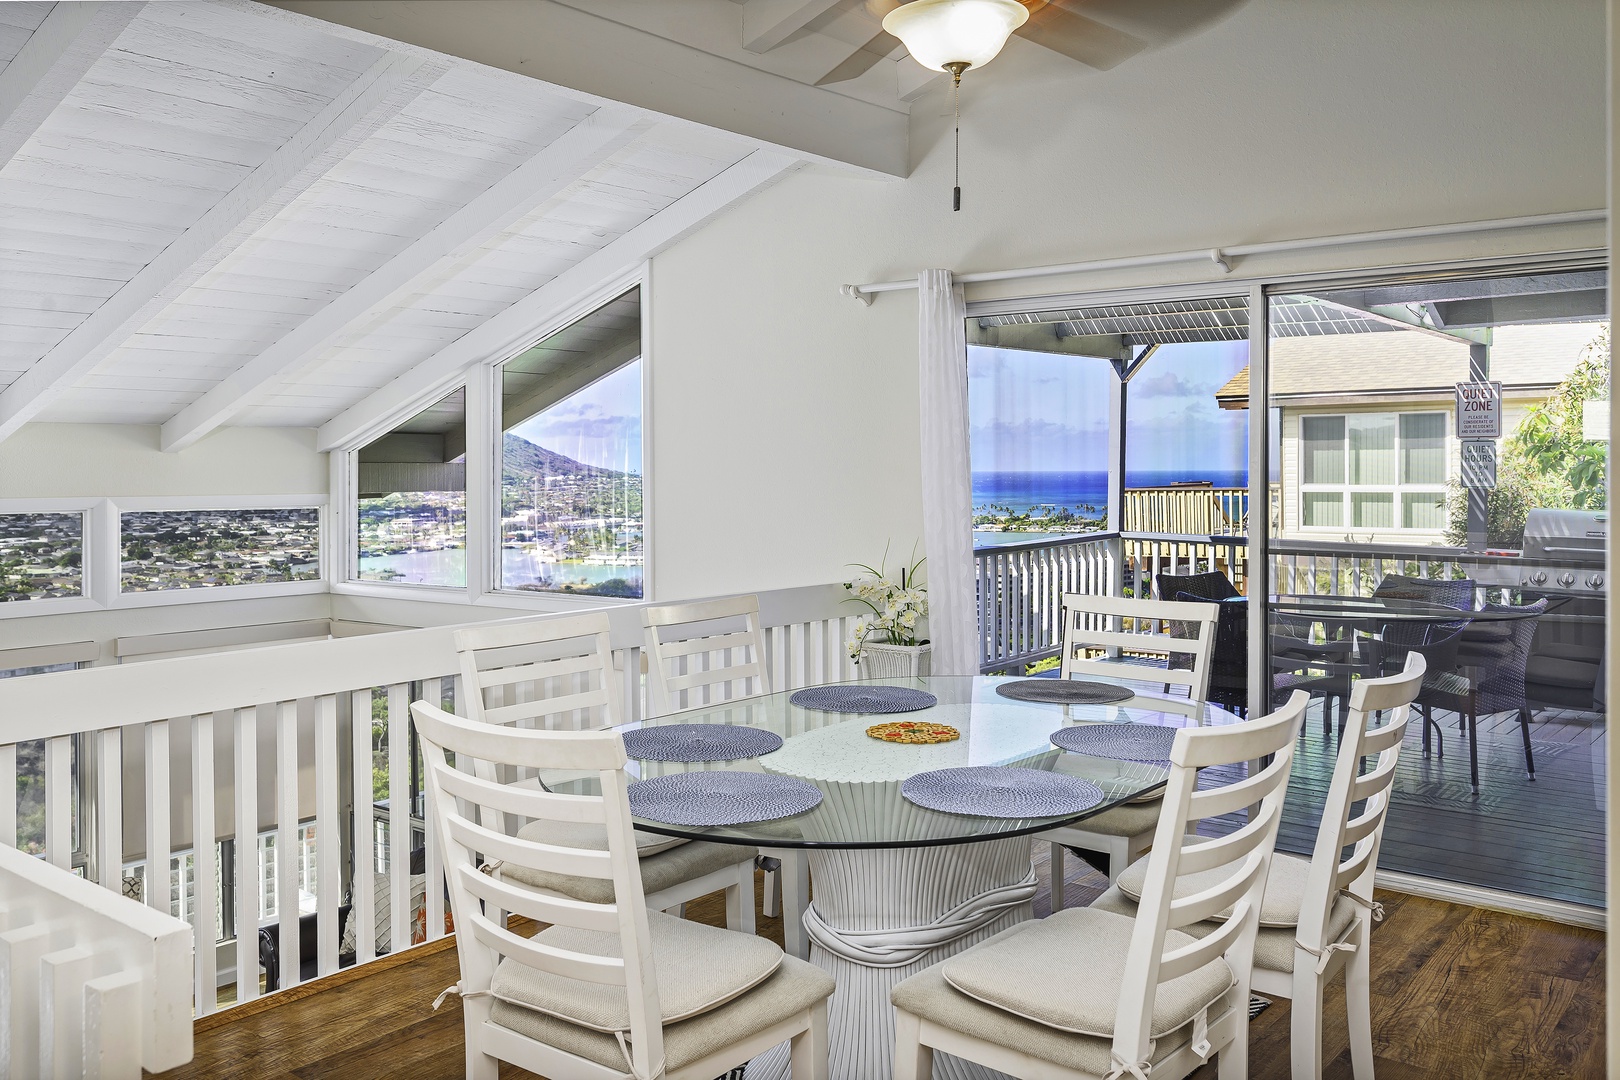 Honolulu Vacation Rentals, Hale Malia - The indoor dining area comfortably seats 6 and boasts gorgeous views